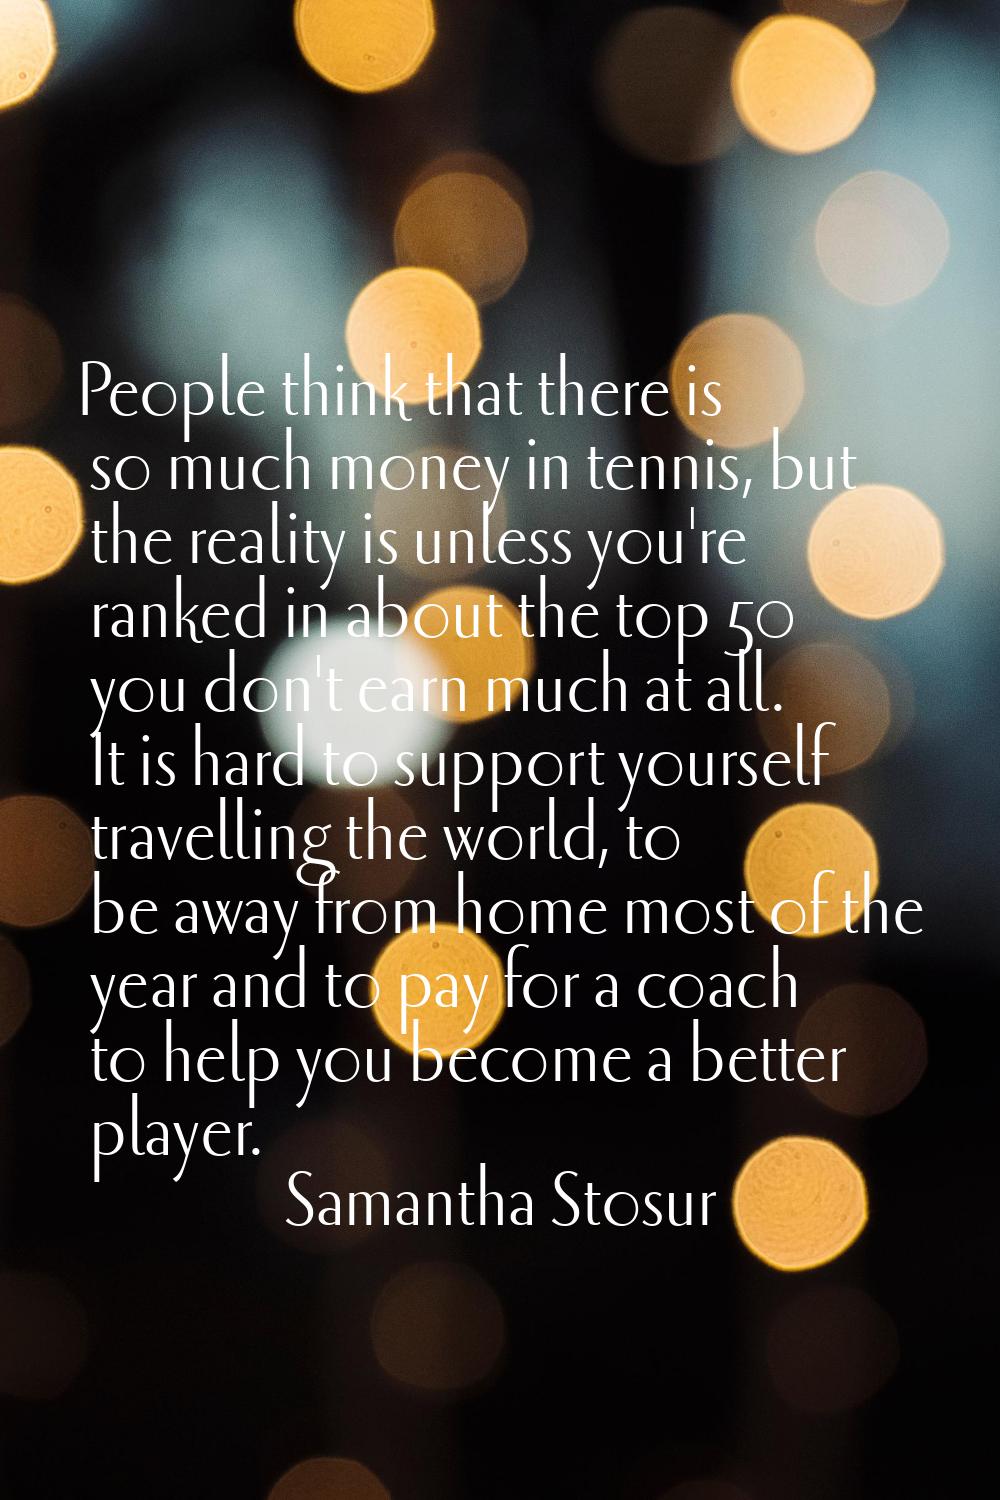 People think that there is so much money in tennis, but the reality is unless you're ranked in abou